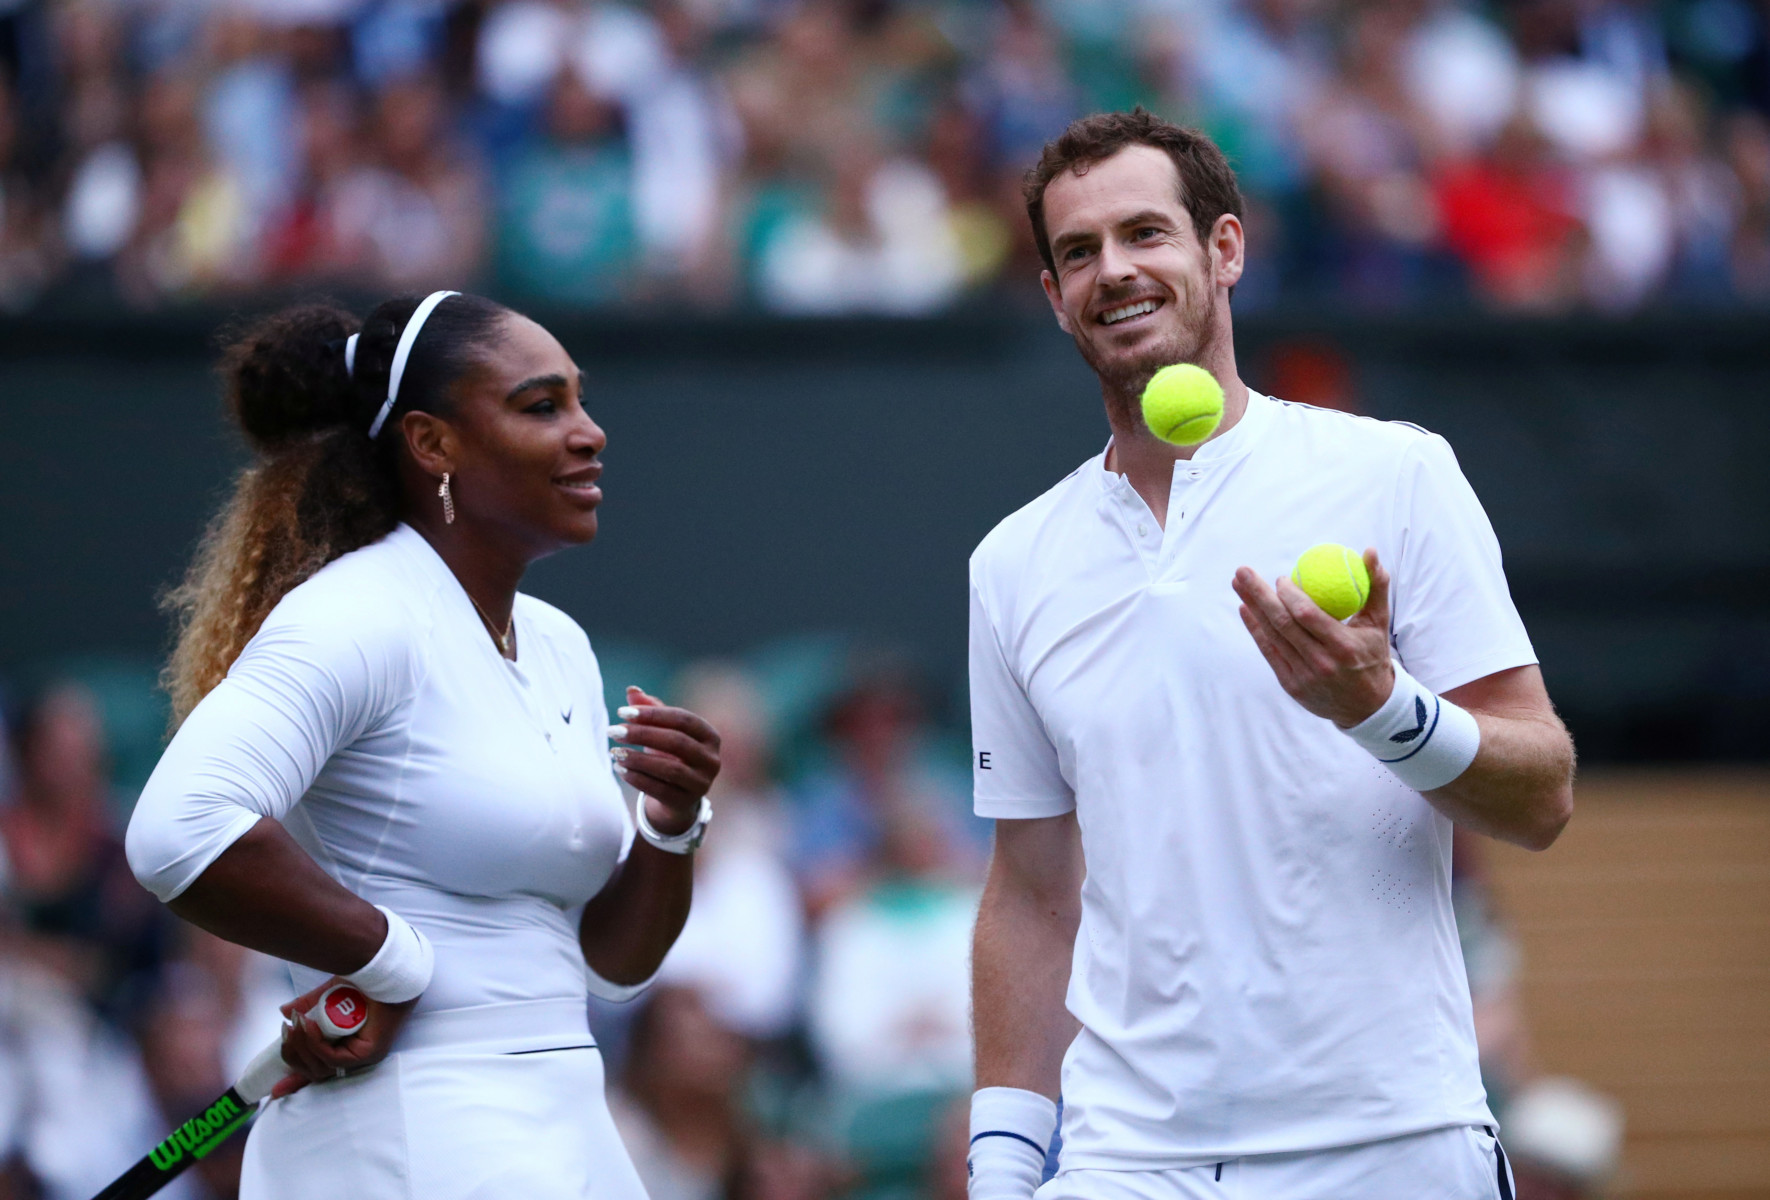 , Wimbledon cancellation a boost for Andy Murray’s hopes but hurts SW19 legends Roger Federer and Serena Williams